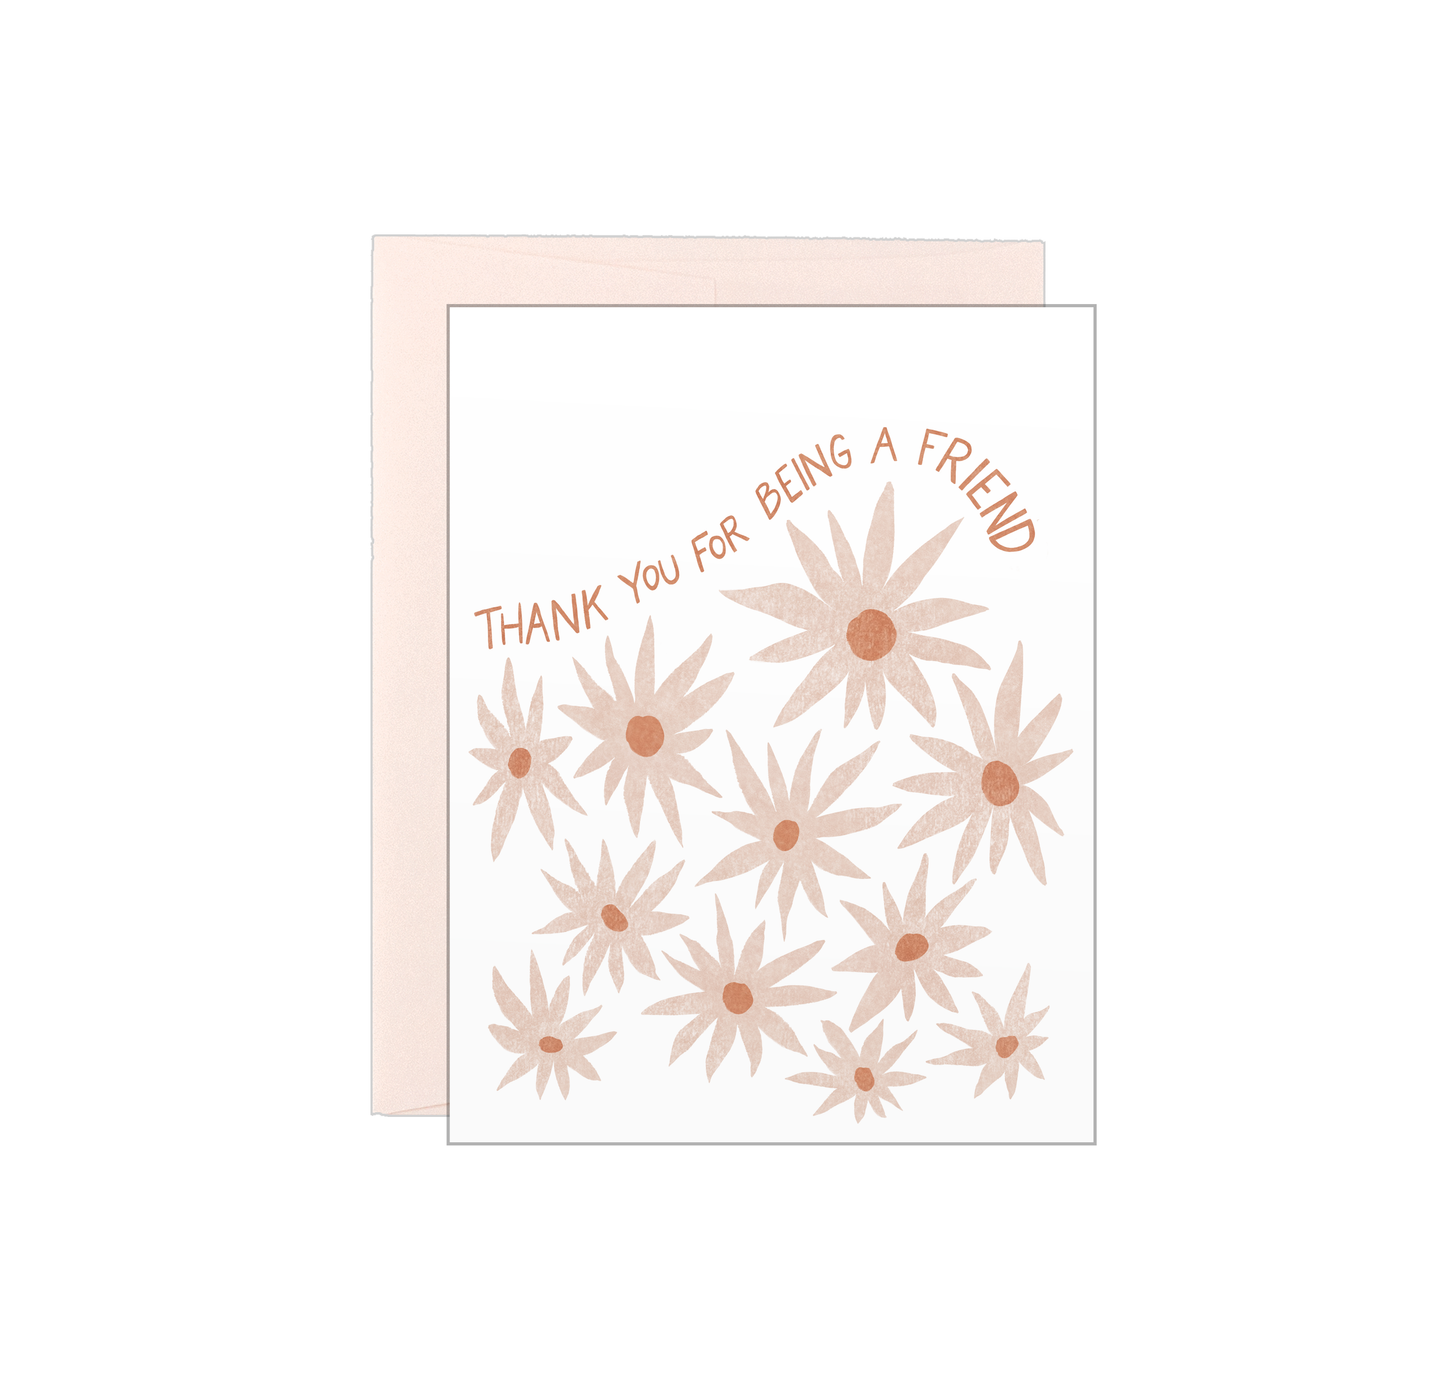 Thank you for being a Friend - Letterpress Card